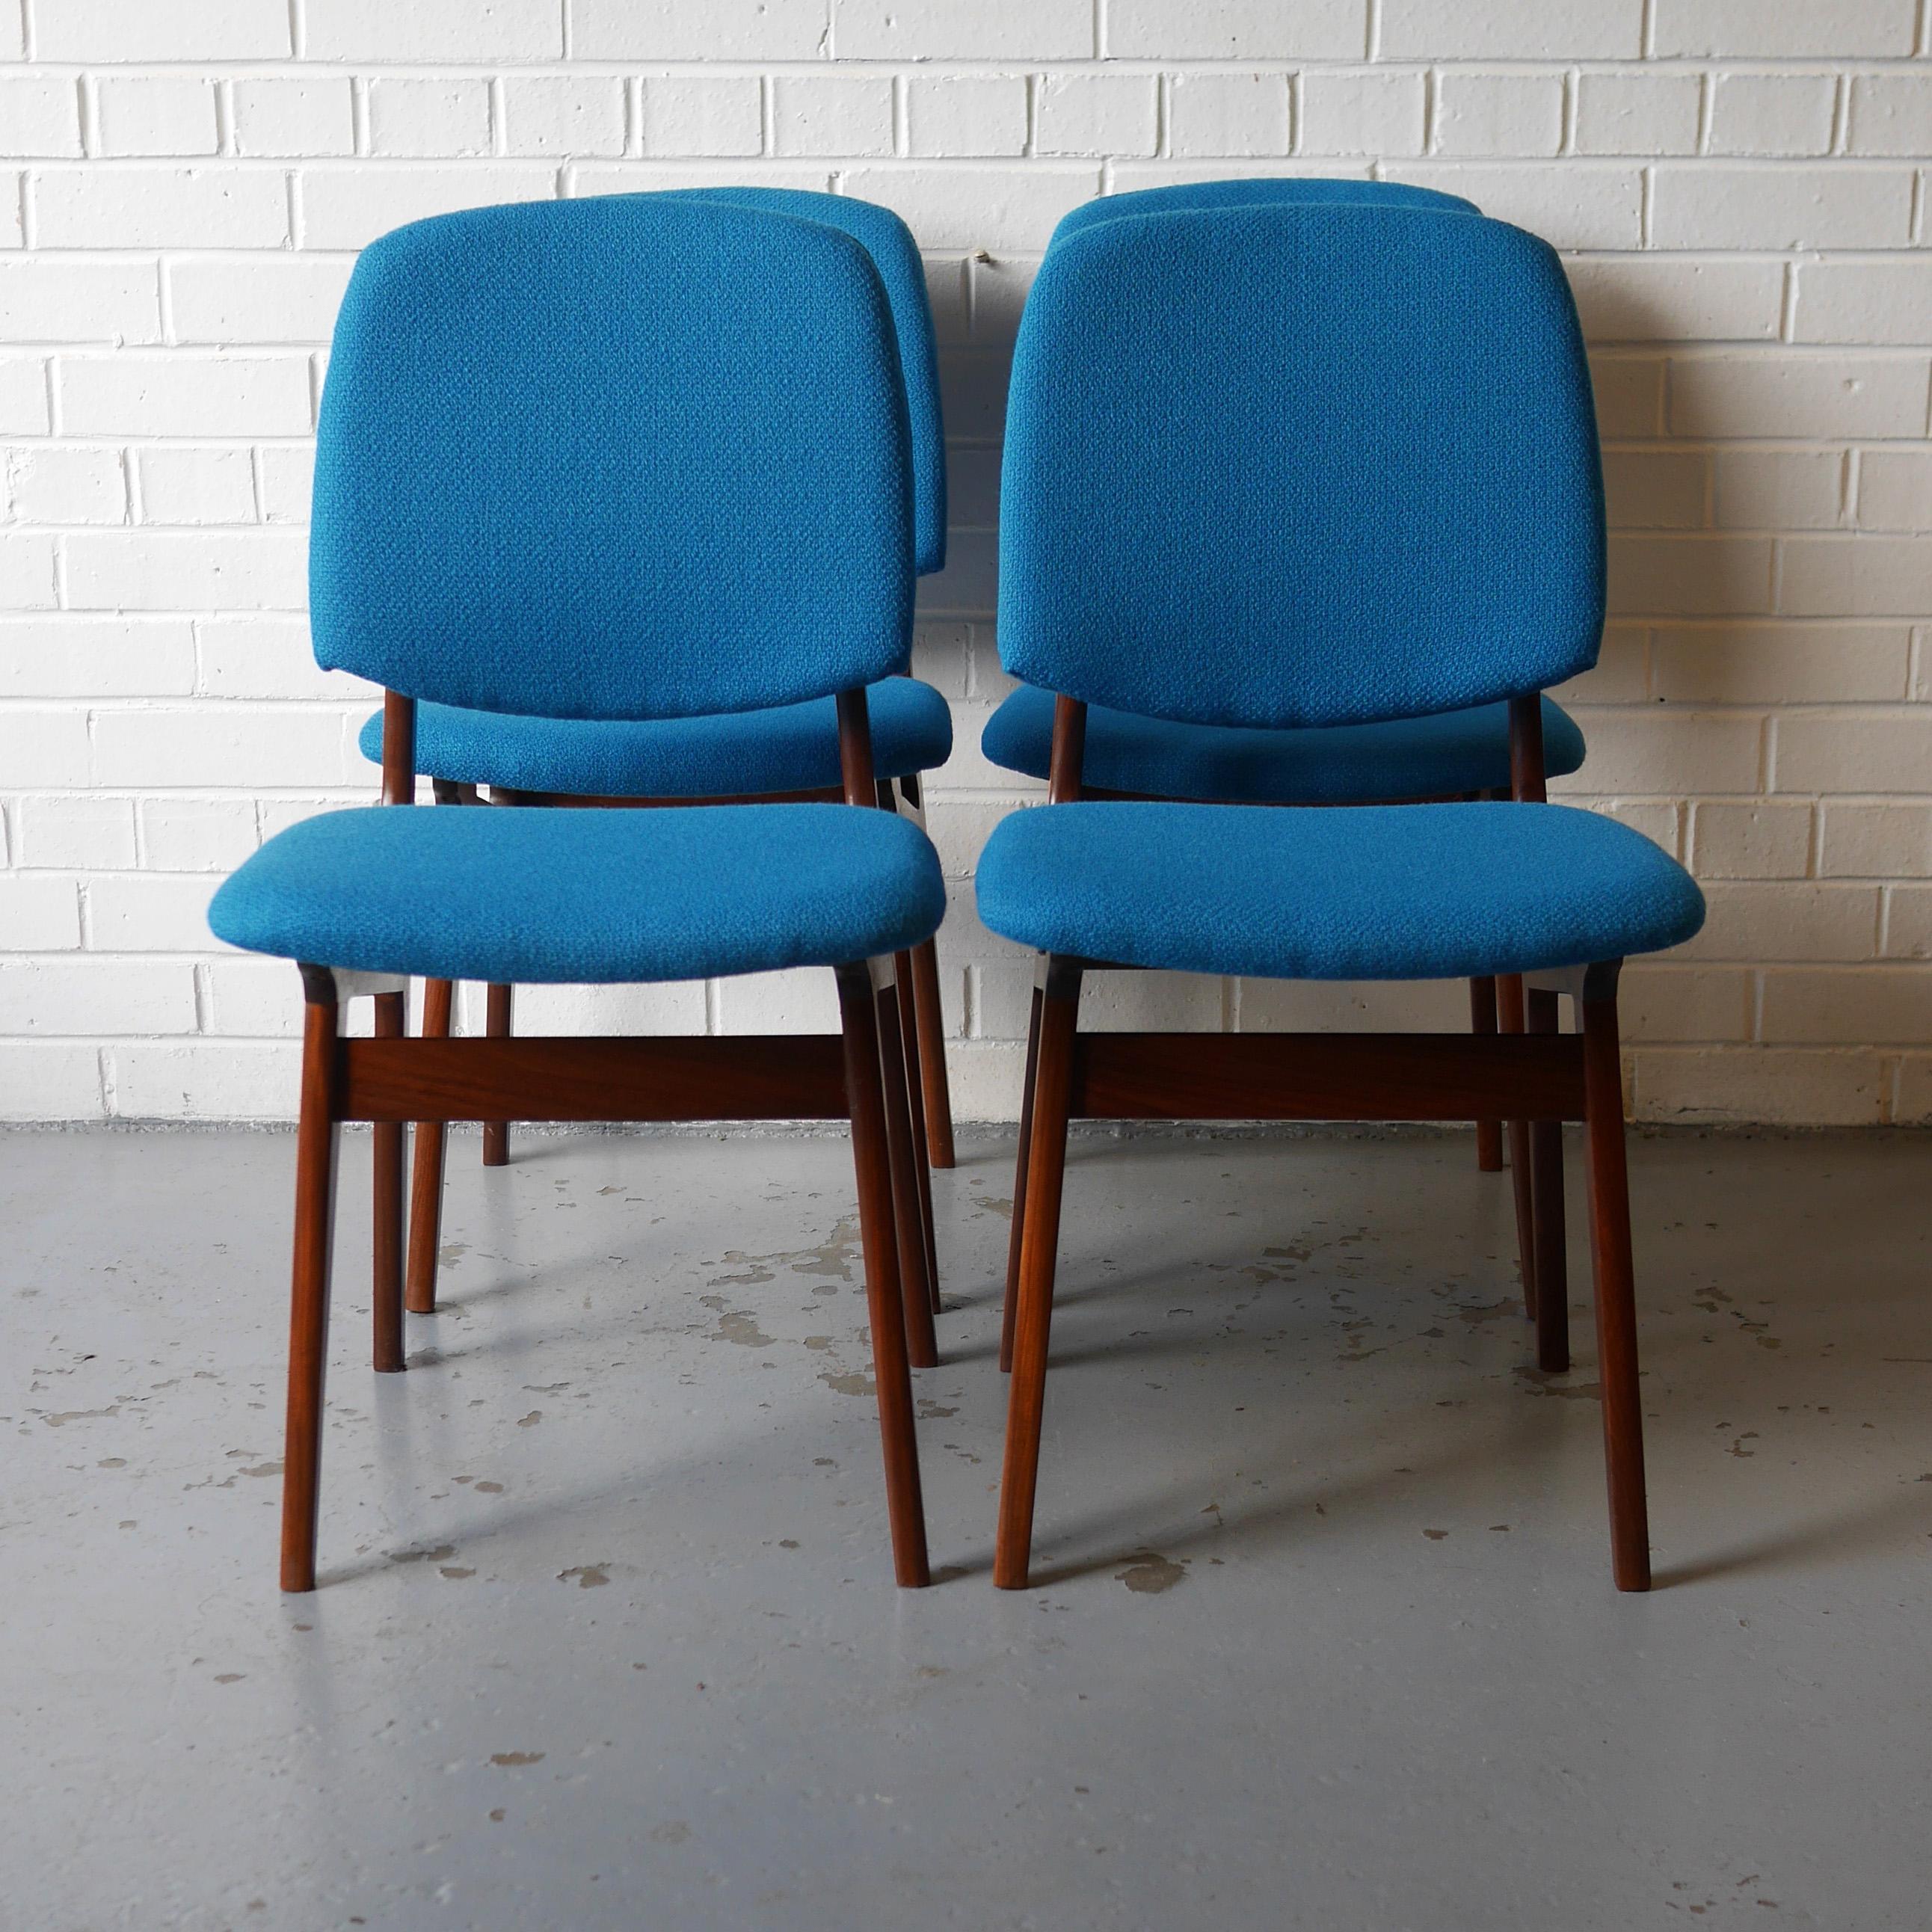 Mid-Century Modern Set of Four Solid Afrormosia Dining Chairs with Blue Wool Upholstery, circa 1961 For Sale